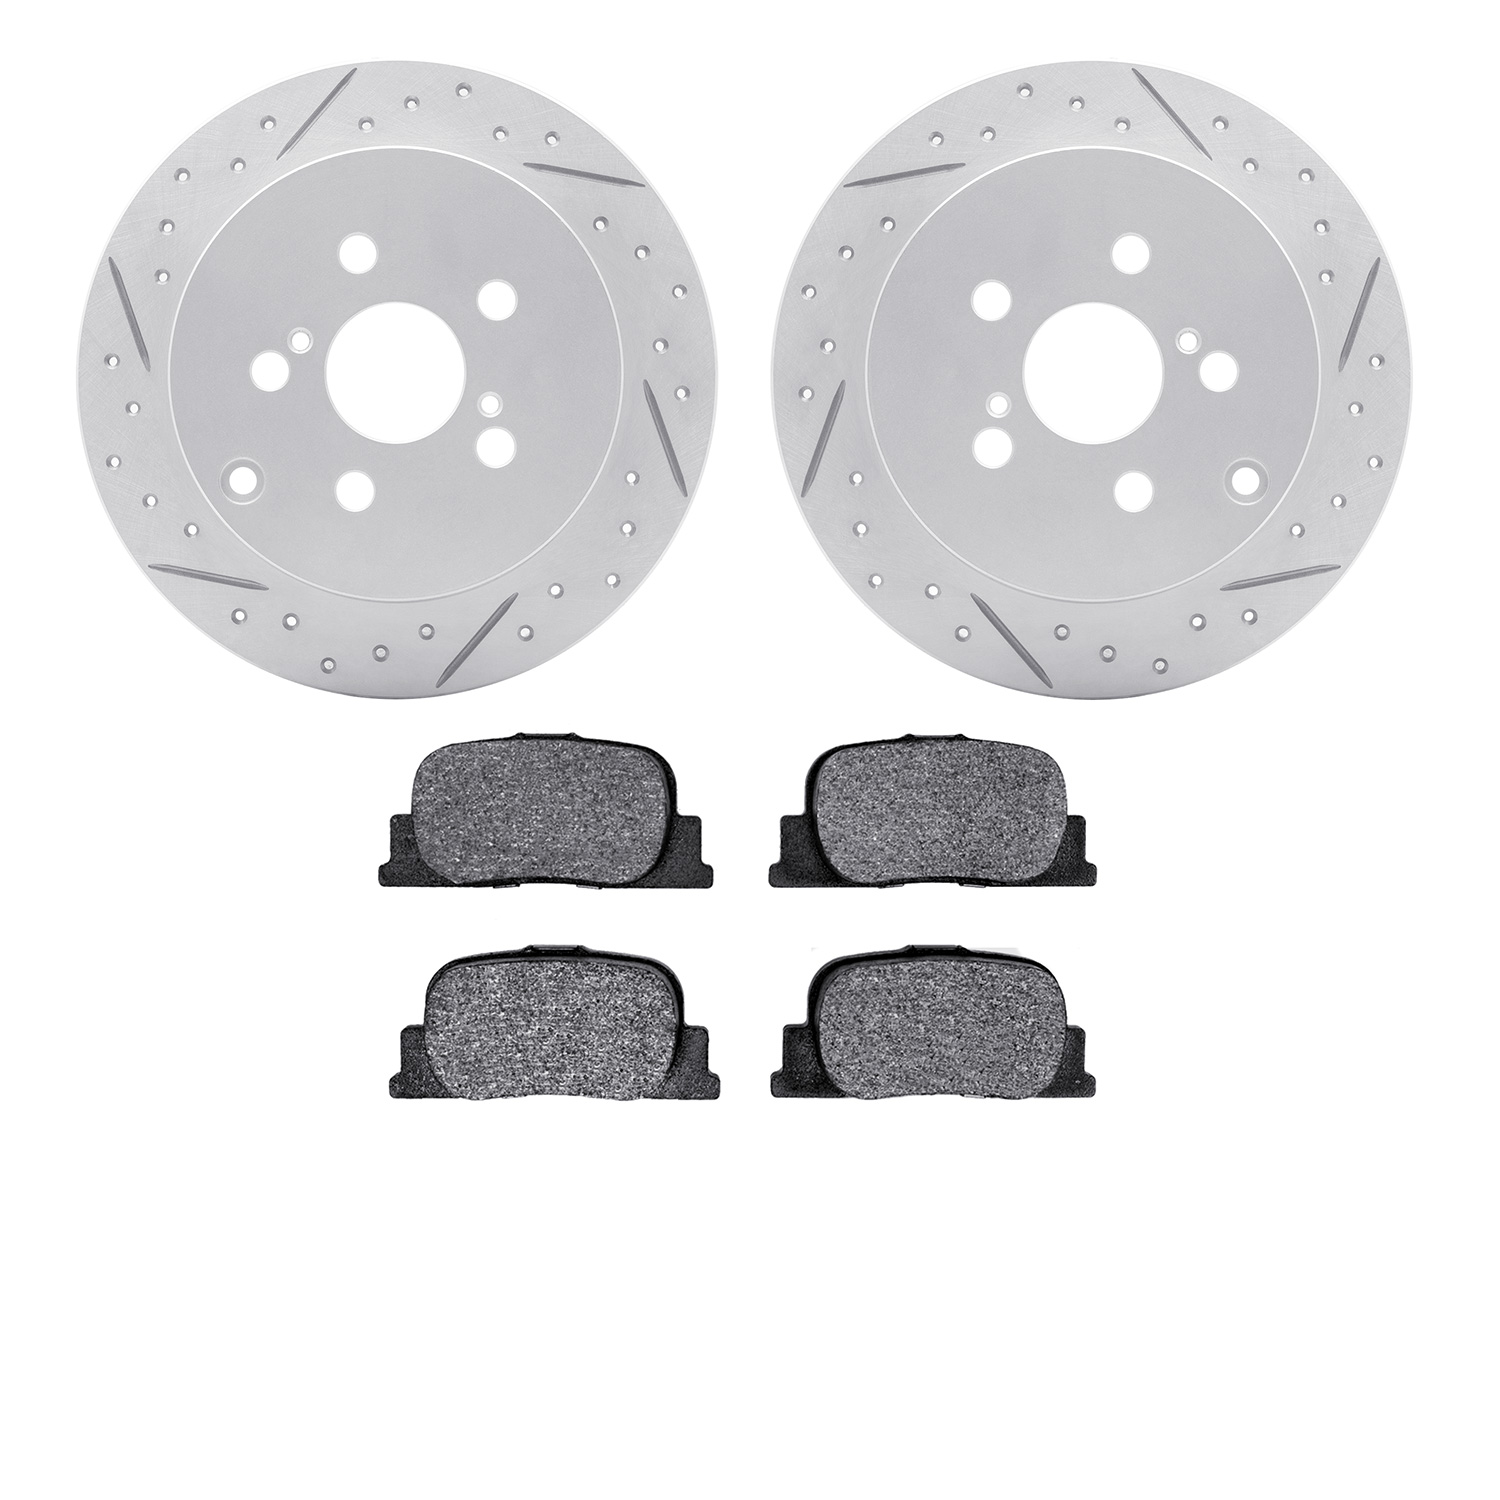 2502-76016 Geoperformance Drilled/Slotted Rotors w/5000 Advanced Brake Pads Kit, 2005-2010 Lexus/Toyota/Scion, Position: Rear